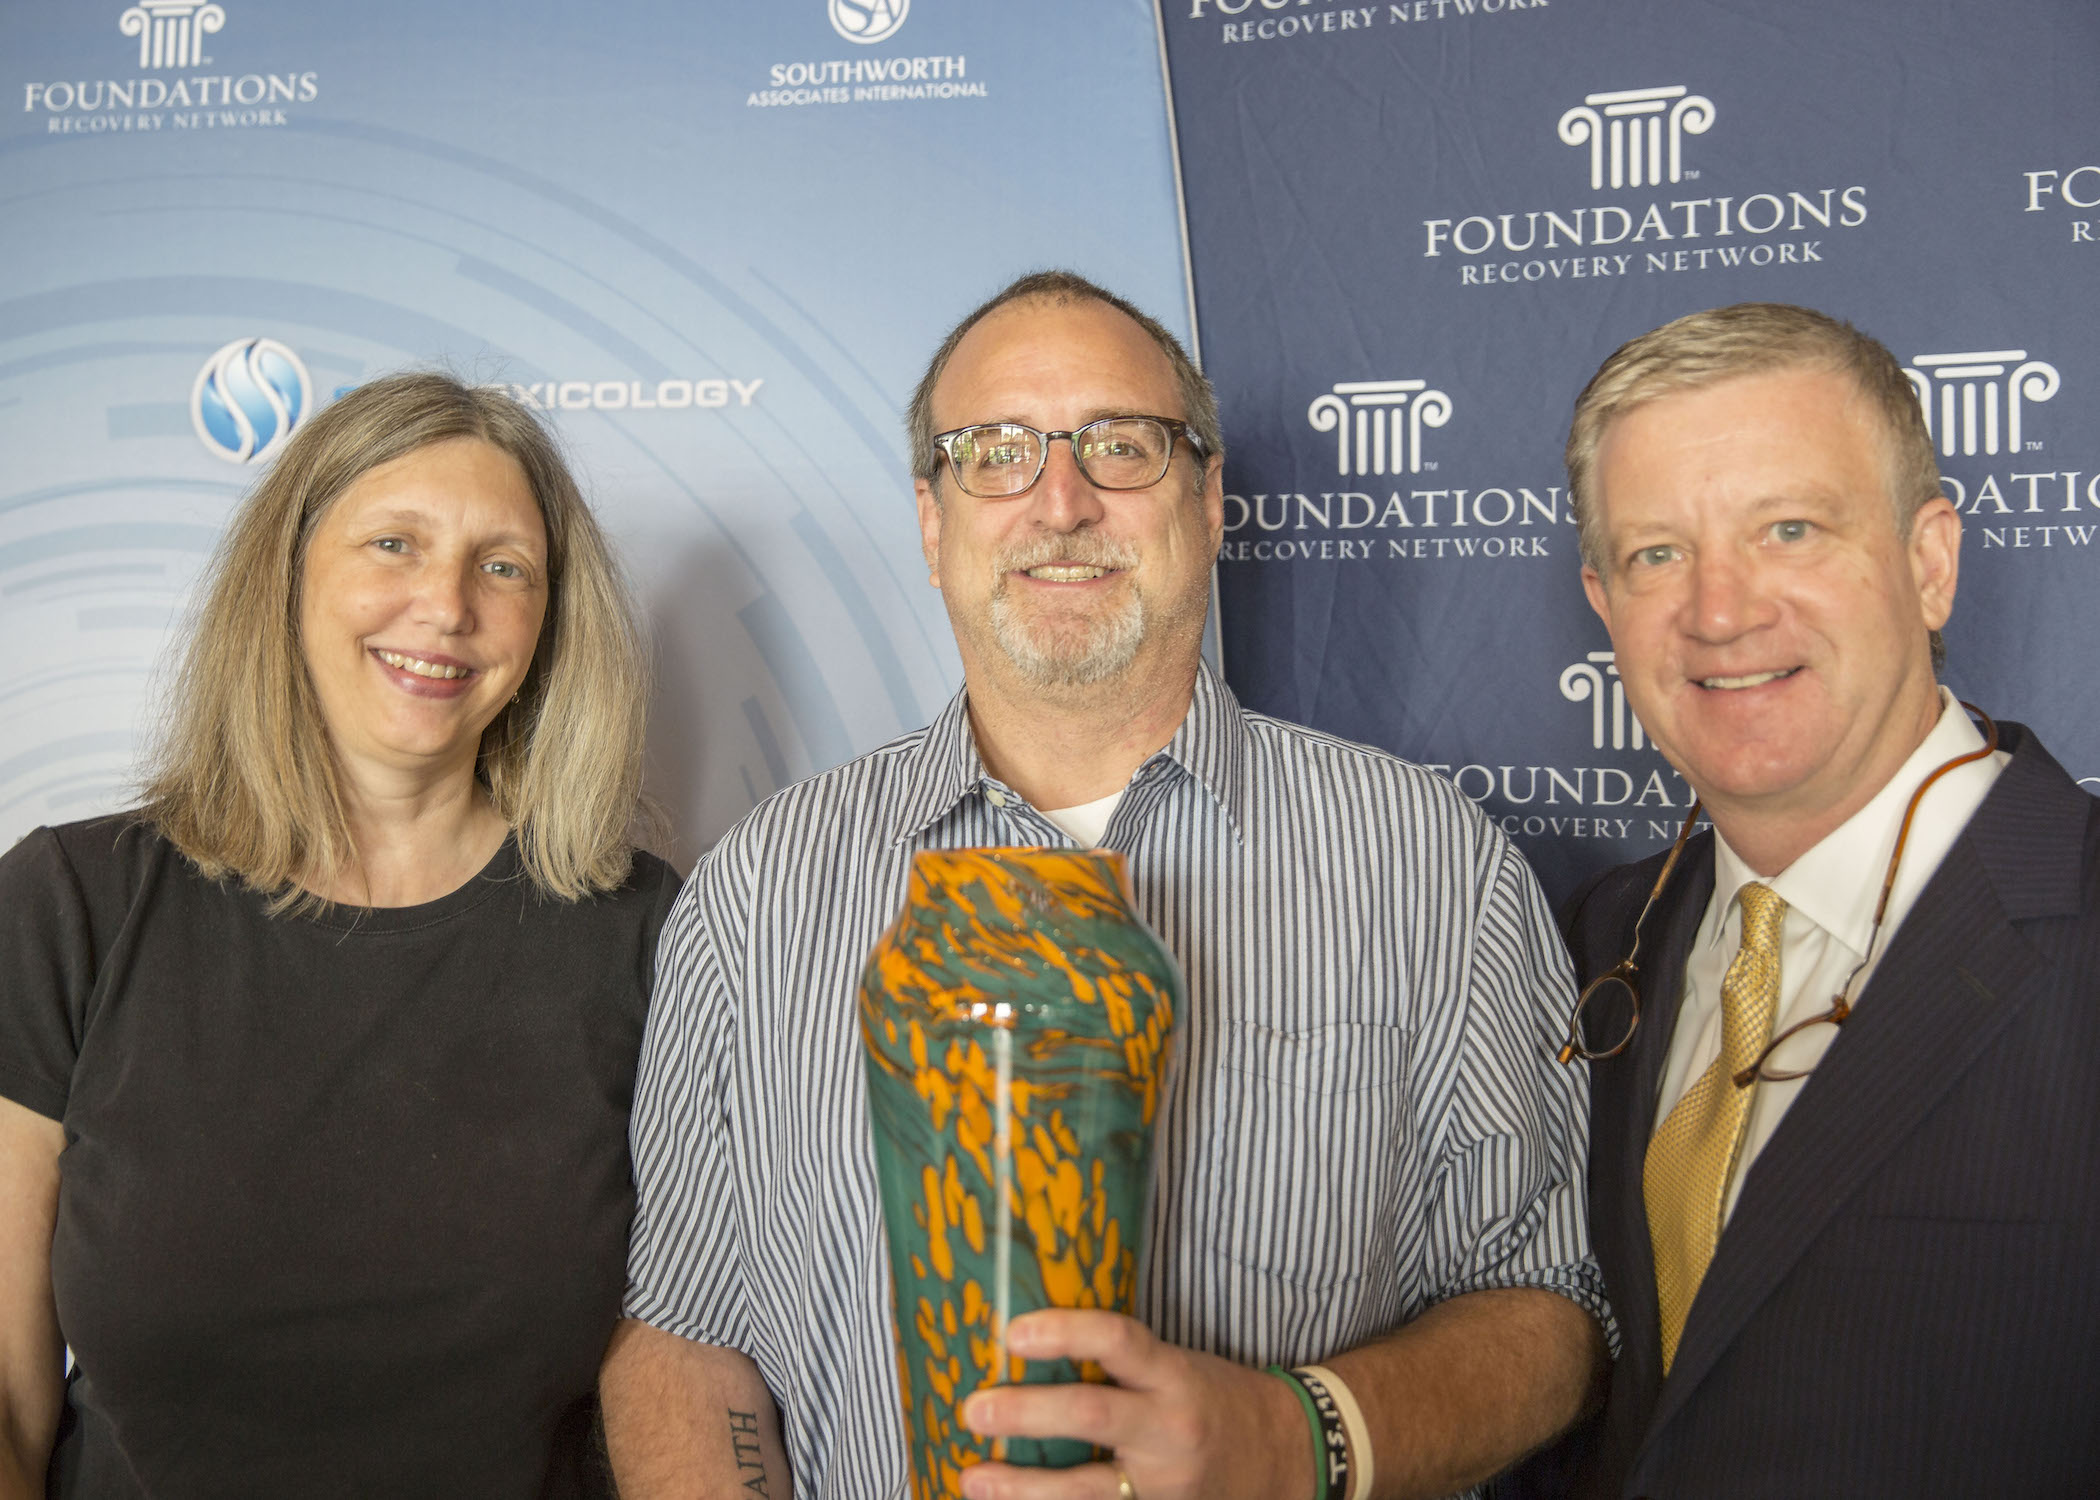 L-R Kathy Dauphinais, Rob Waggener, CEO Foundations Recovery Network and Dean Dauphinais